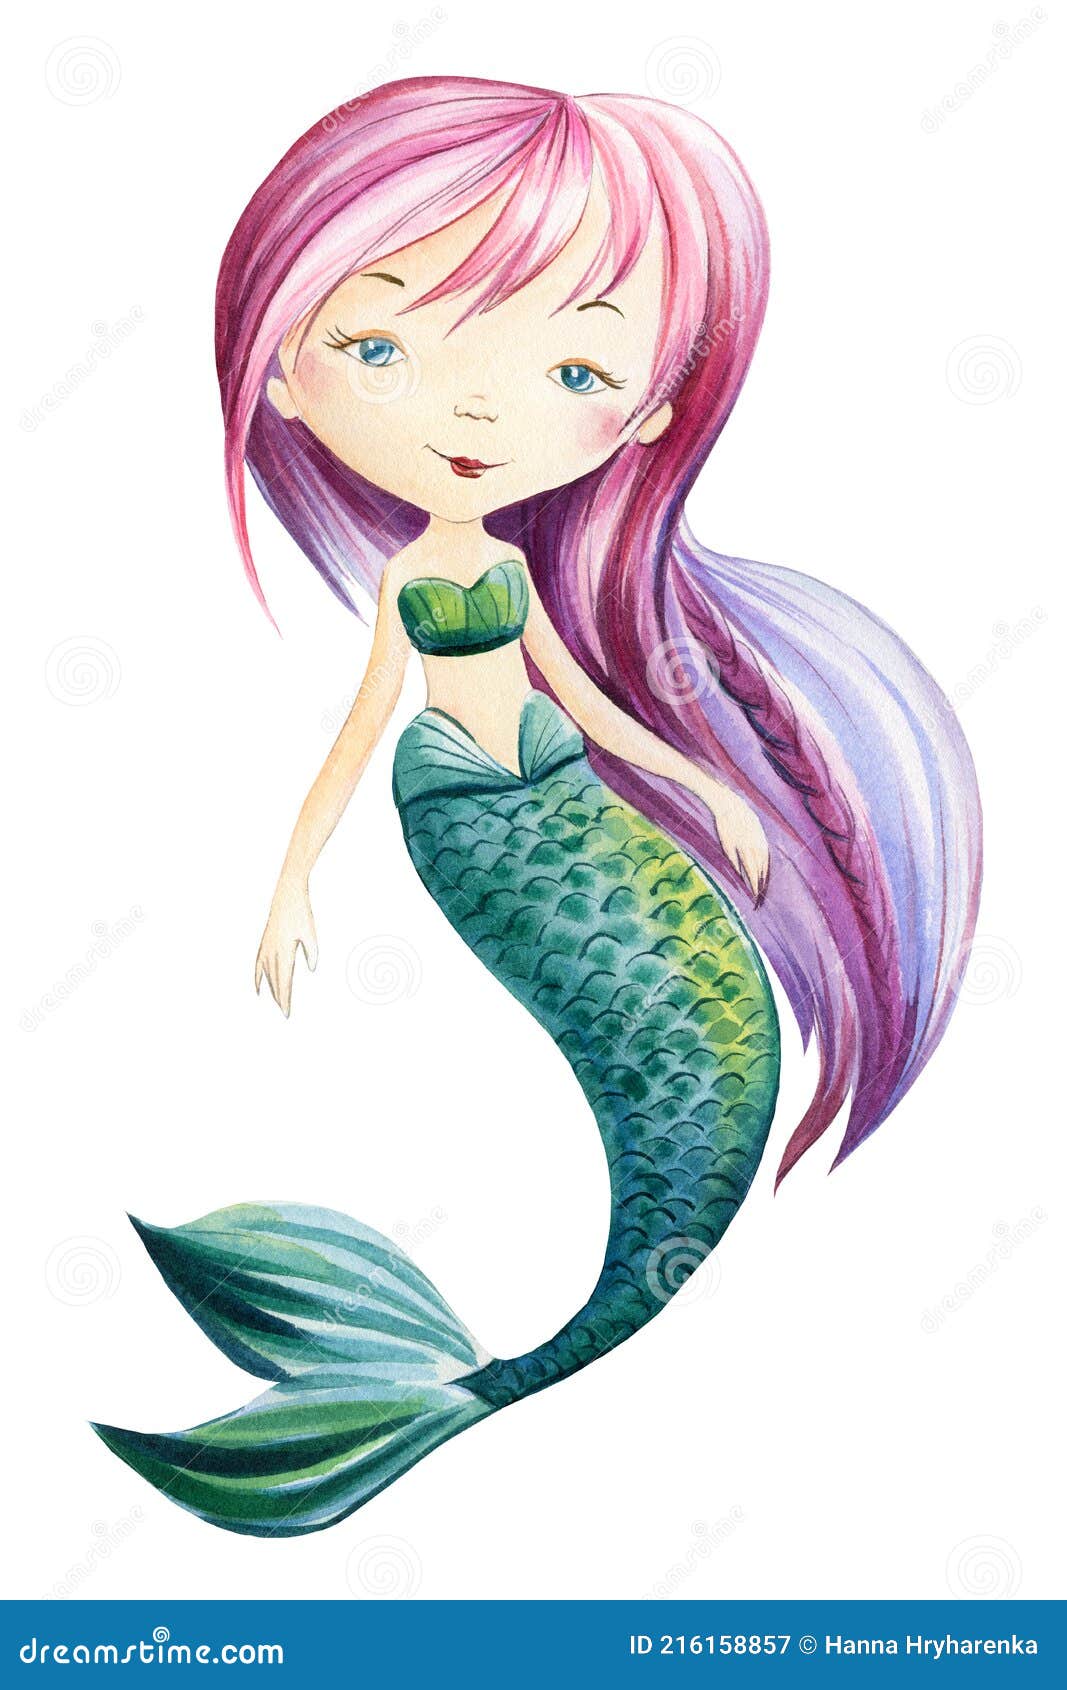 How to draw a Mermaid  YouTube